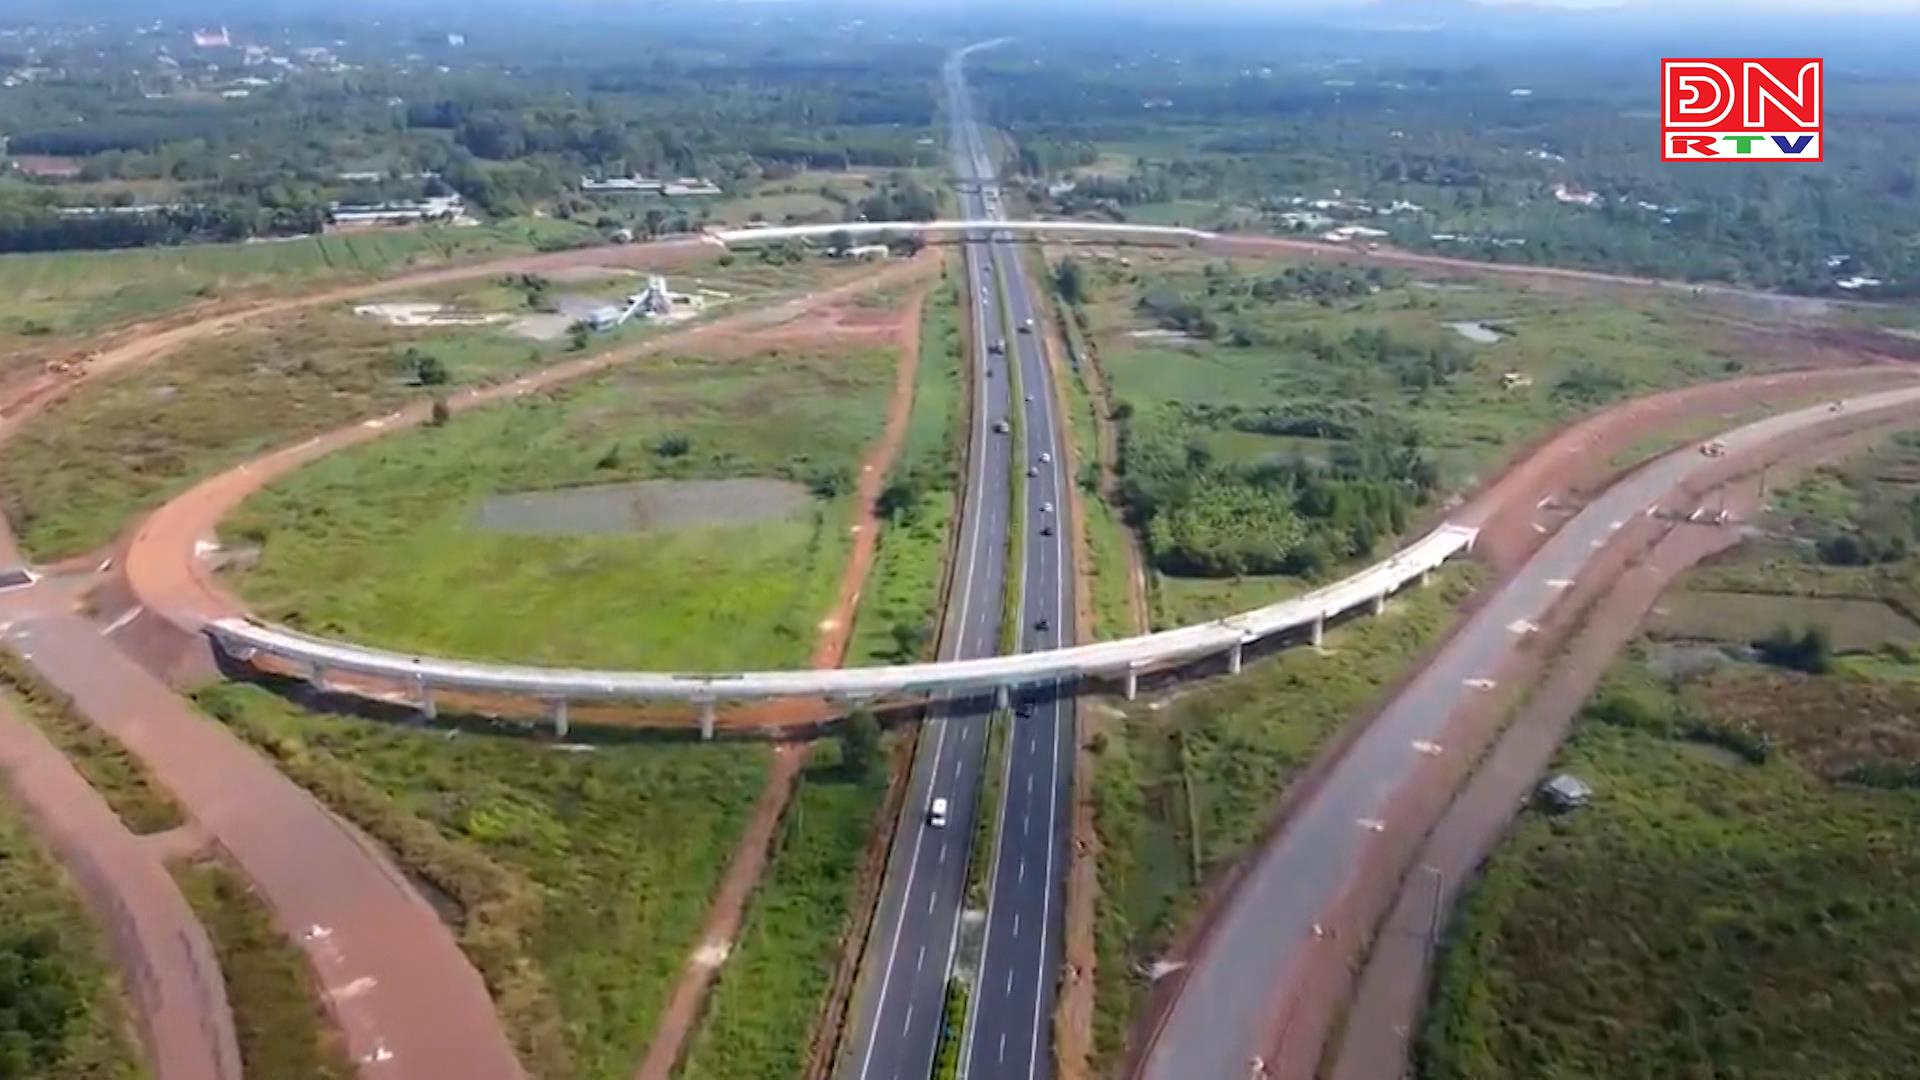 DAU GIAY – PHAN THIET EXPRESSWAY BEFORE THE TECHNICAL TRAFFIC DATE OF DECEMBER 21, 2022